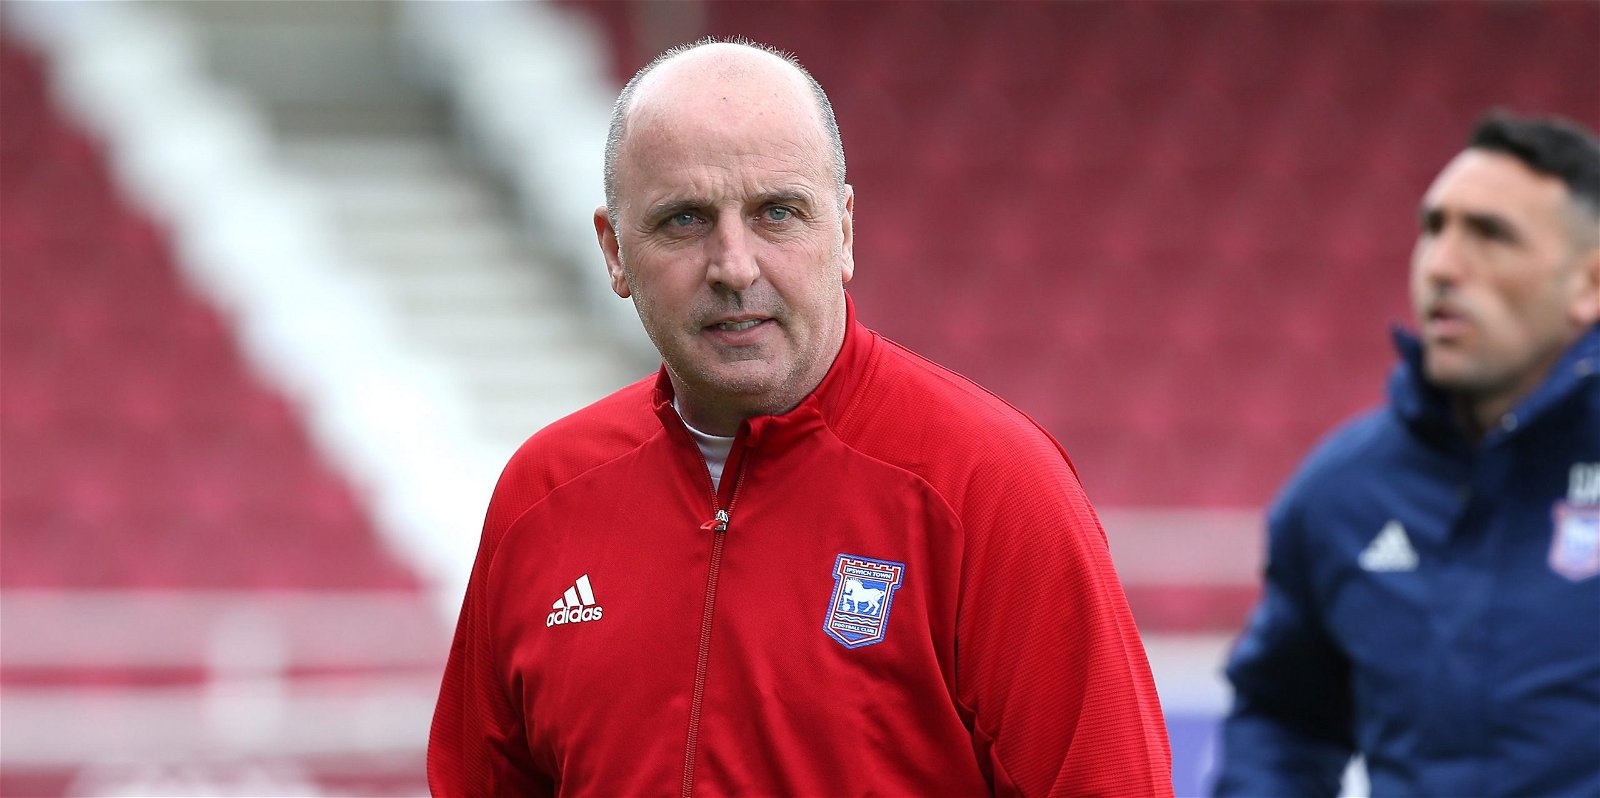 , Ipswich Town season preview &#8211; 10 new faces, Cook eyeing his second League One title